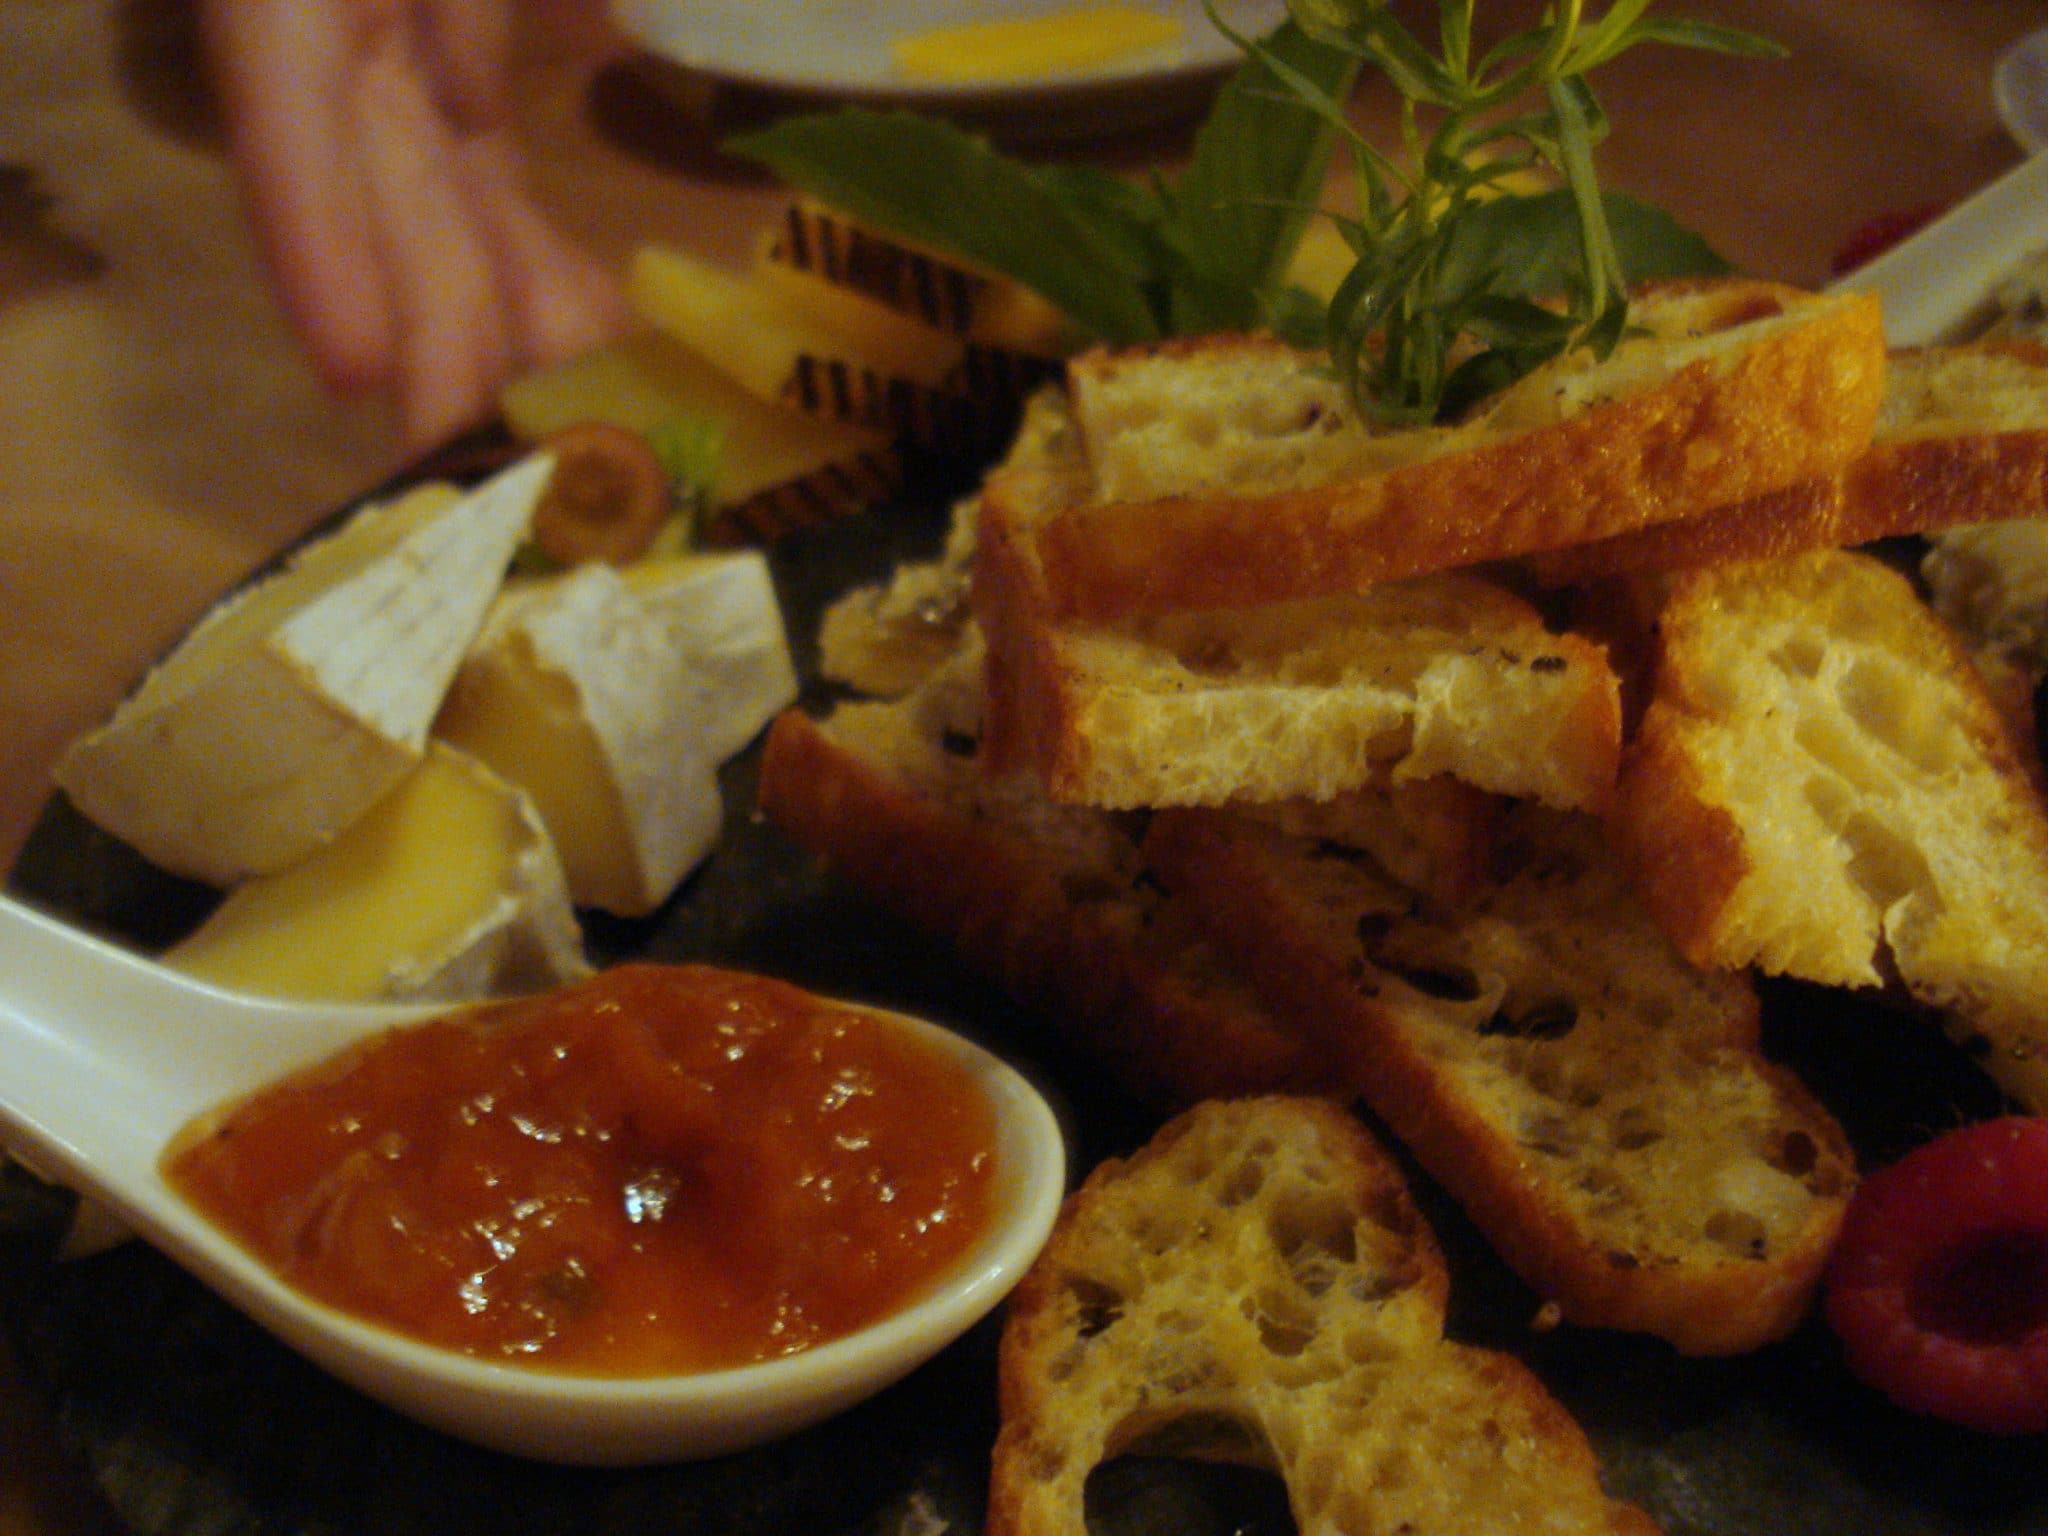 Bread and cheese plate with peach dipping sauce